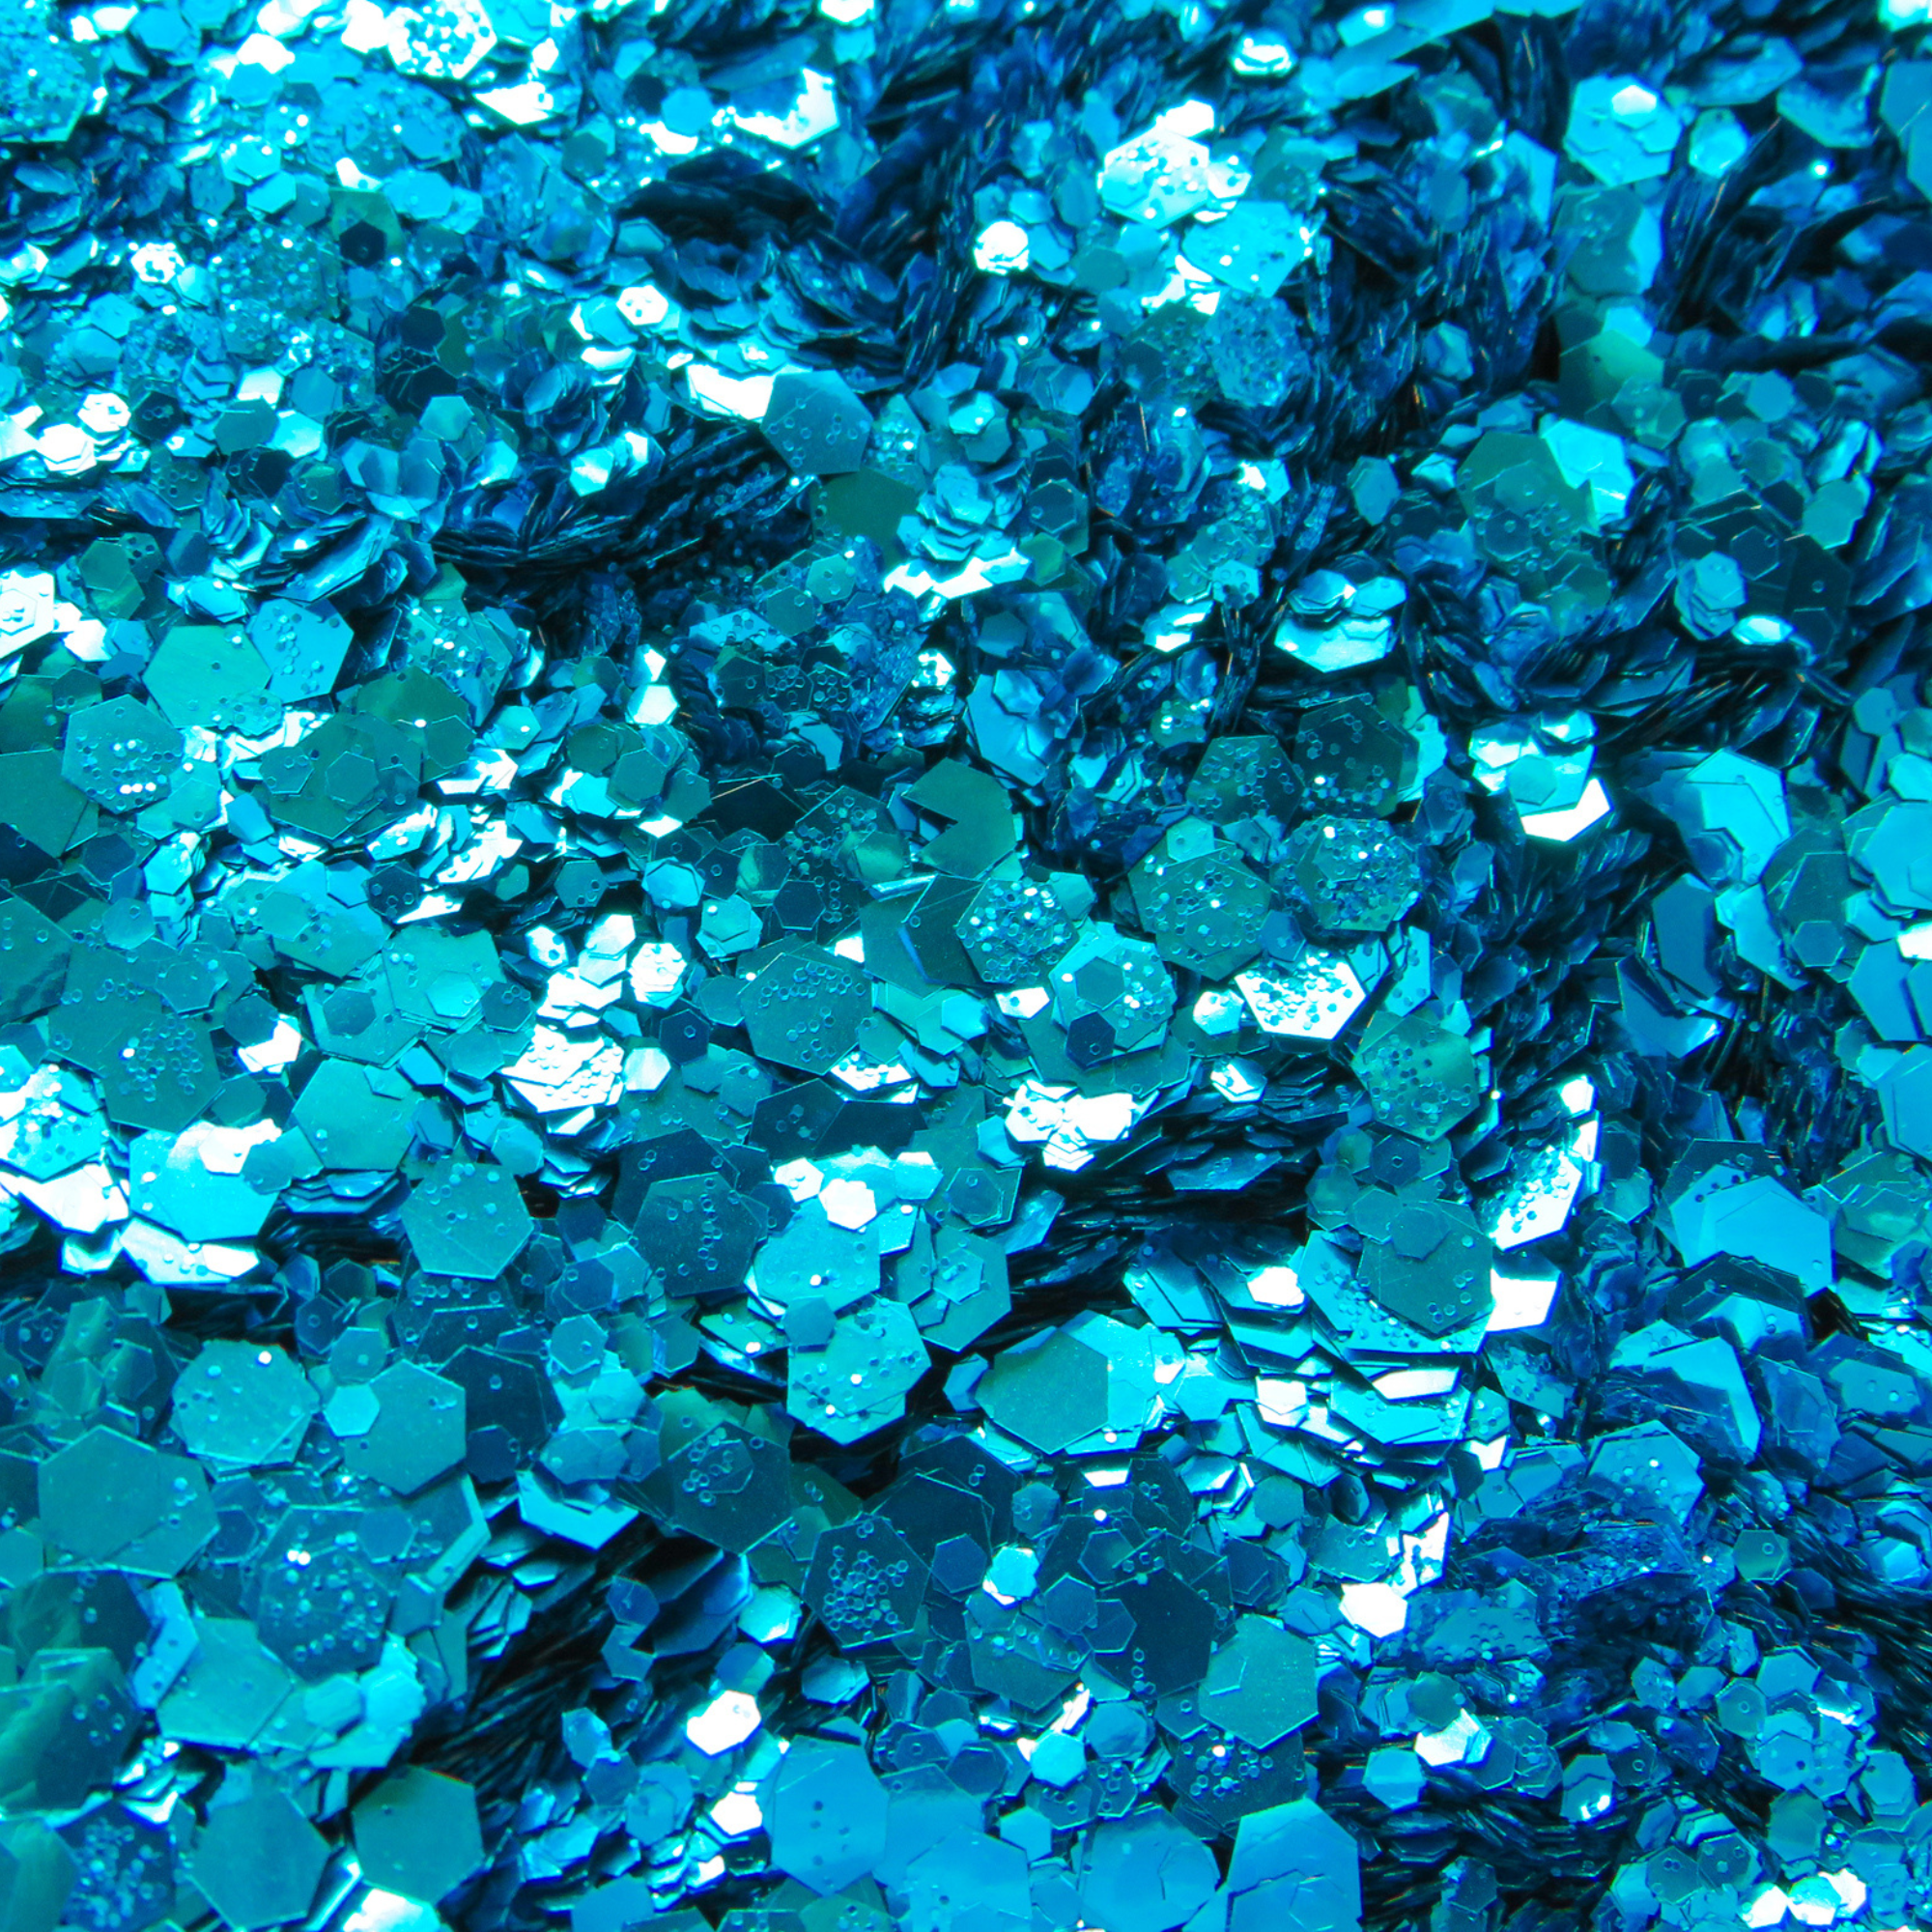 Sky blue biodegradable glitter mix by Luminosity Glitter. Our wholesale bulk bags are biodegradable too.